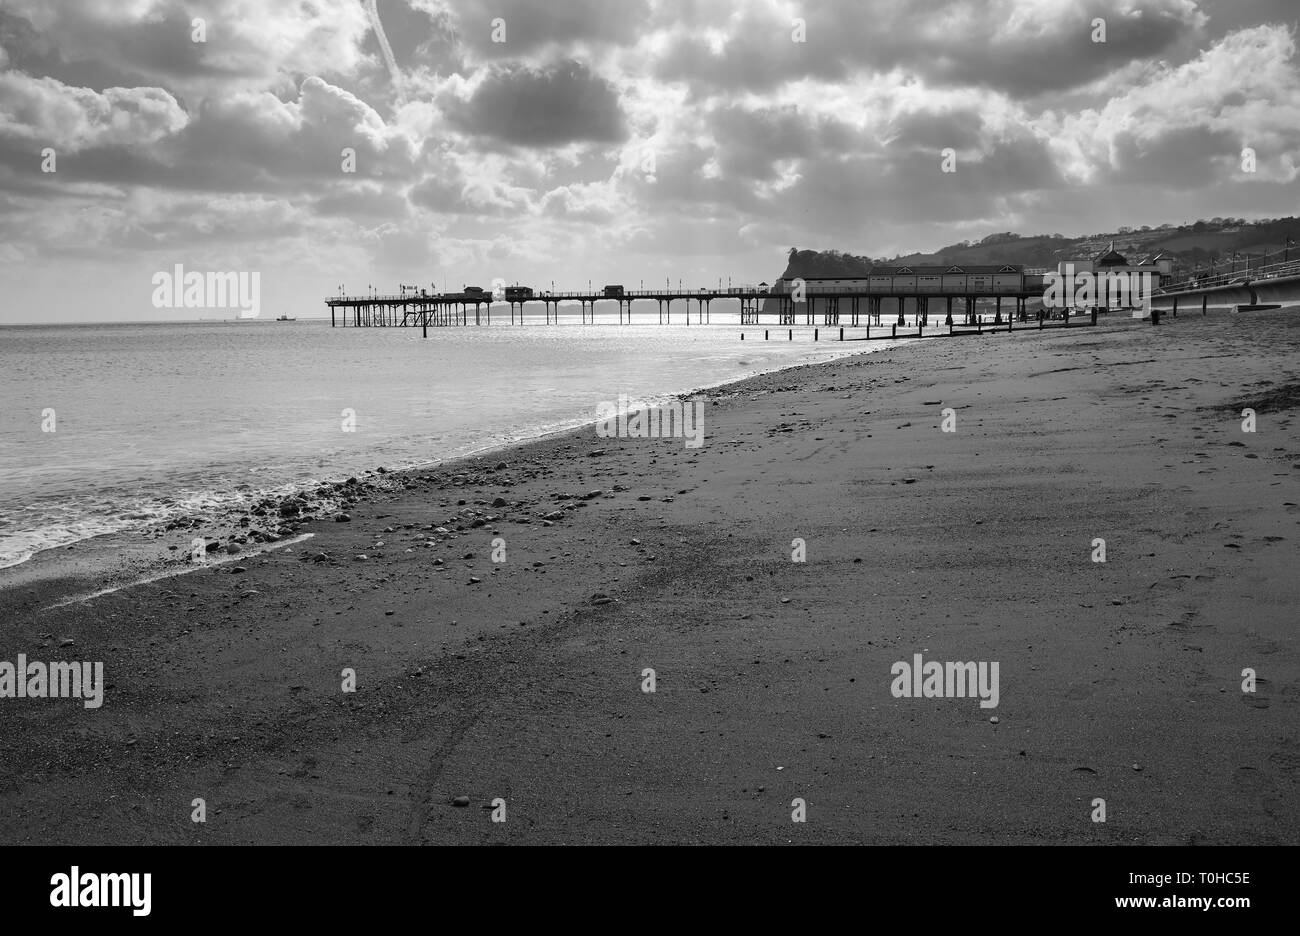 Grand Pier Teignmouth a holiday resort in South Devon. Off - Season Stock Photo